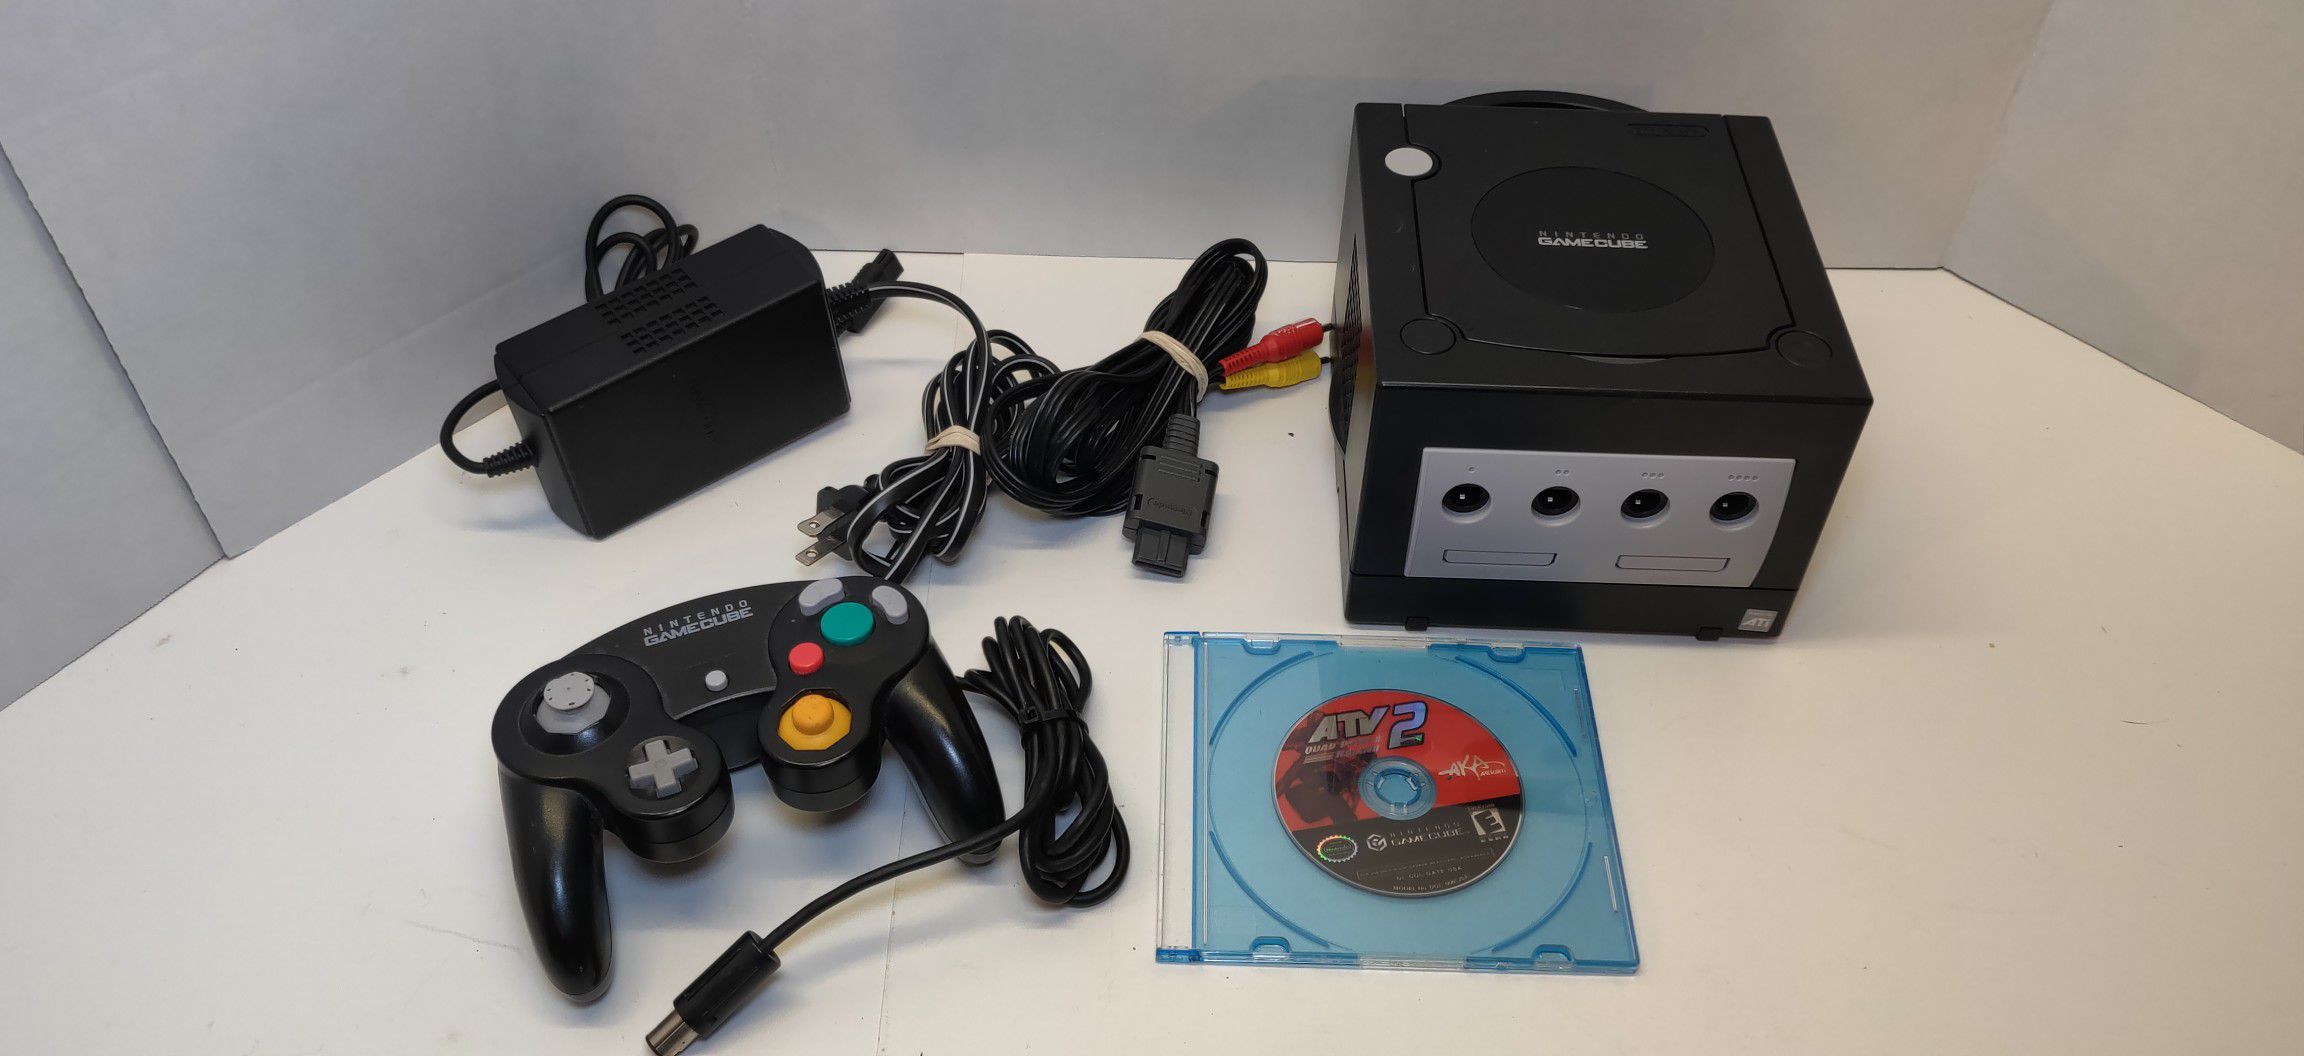 Nintendo Gamecube w/ controller and game